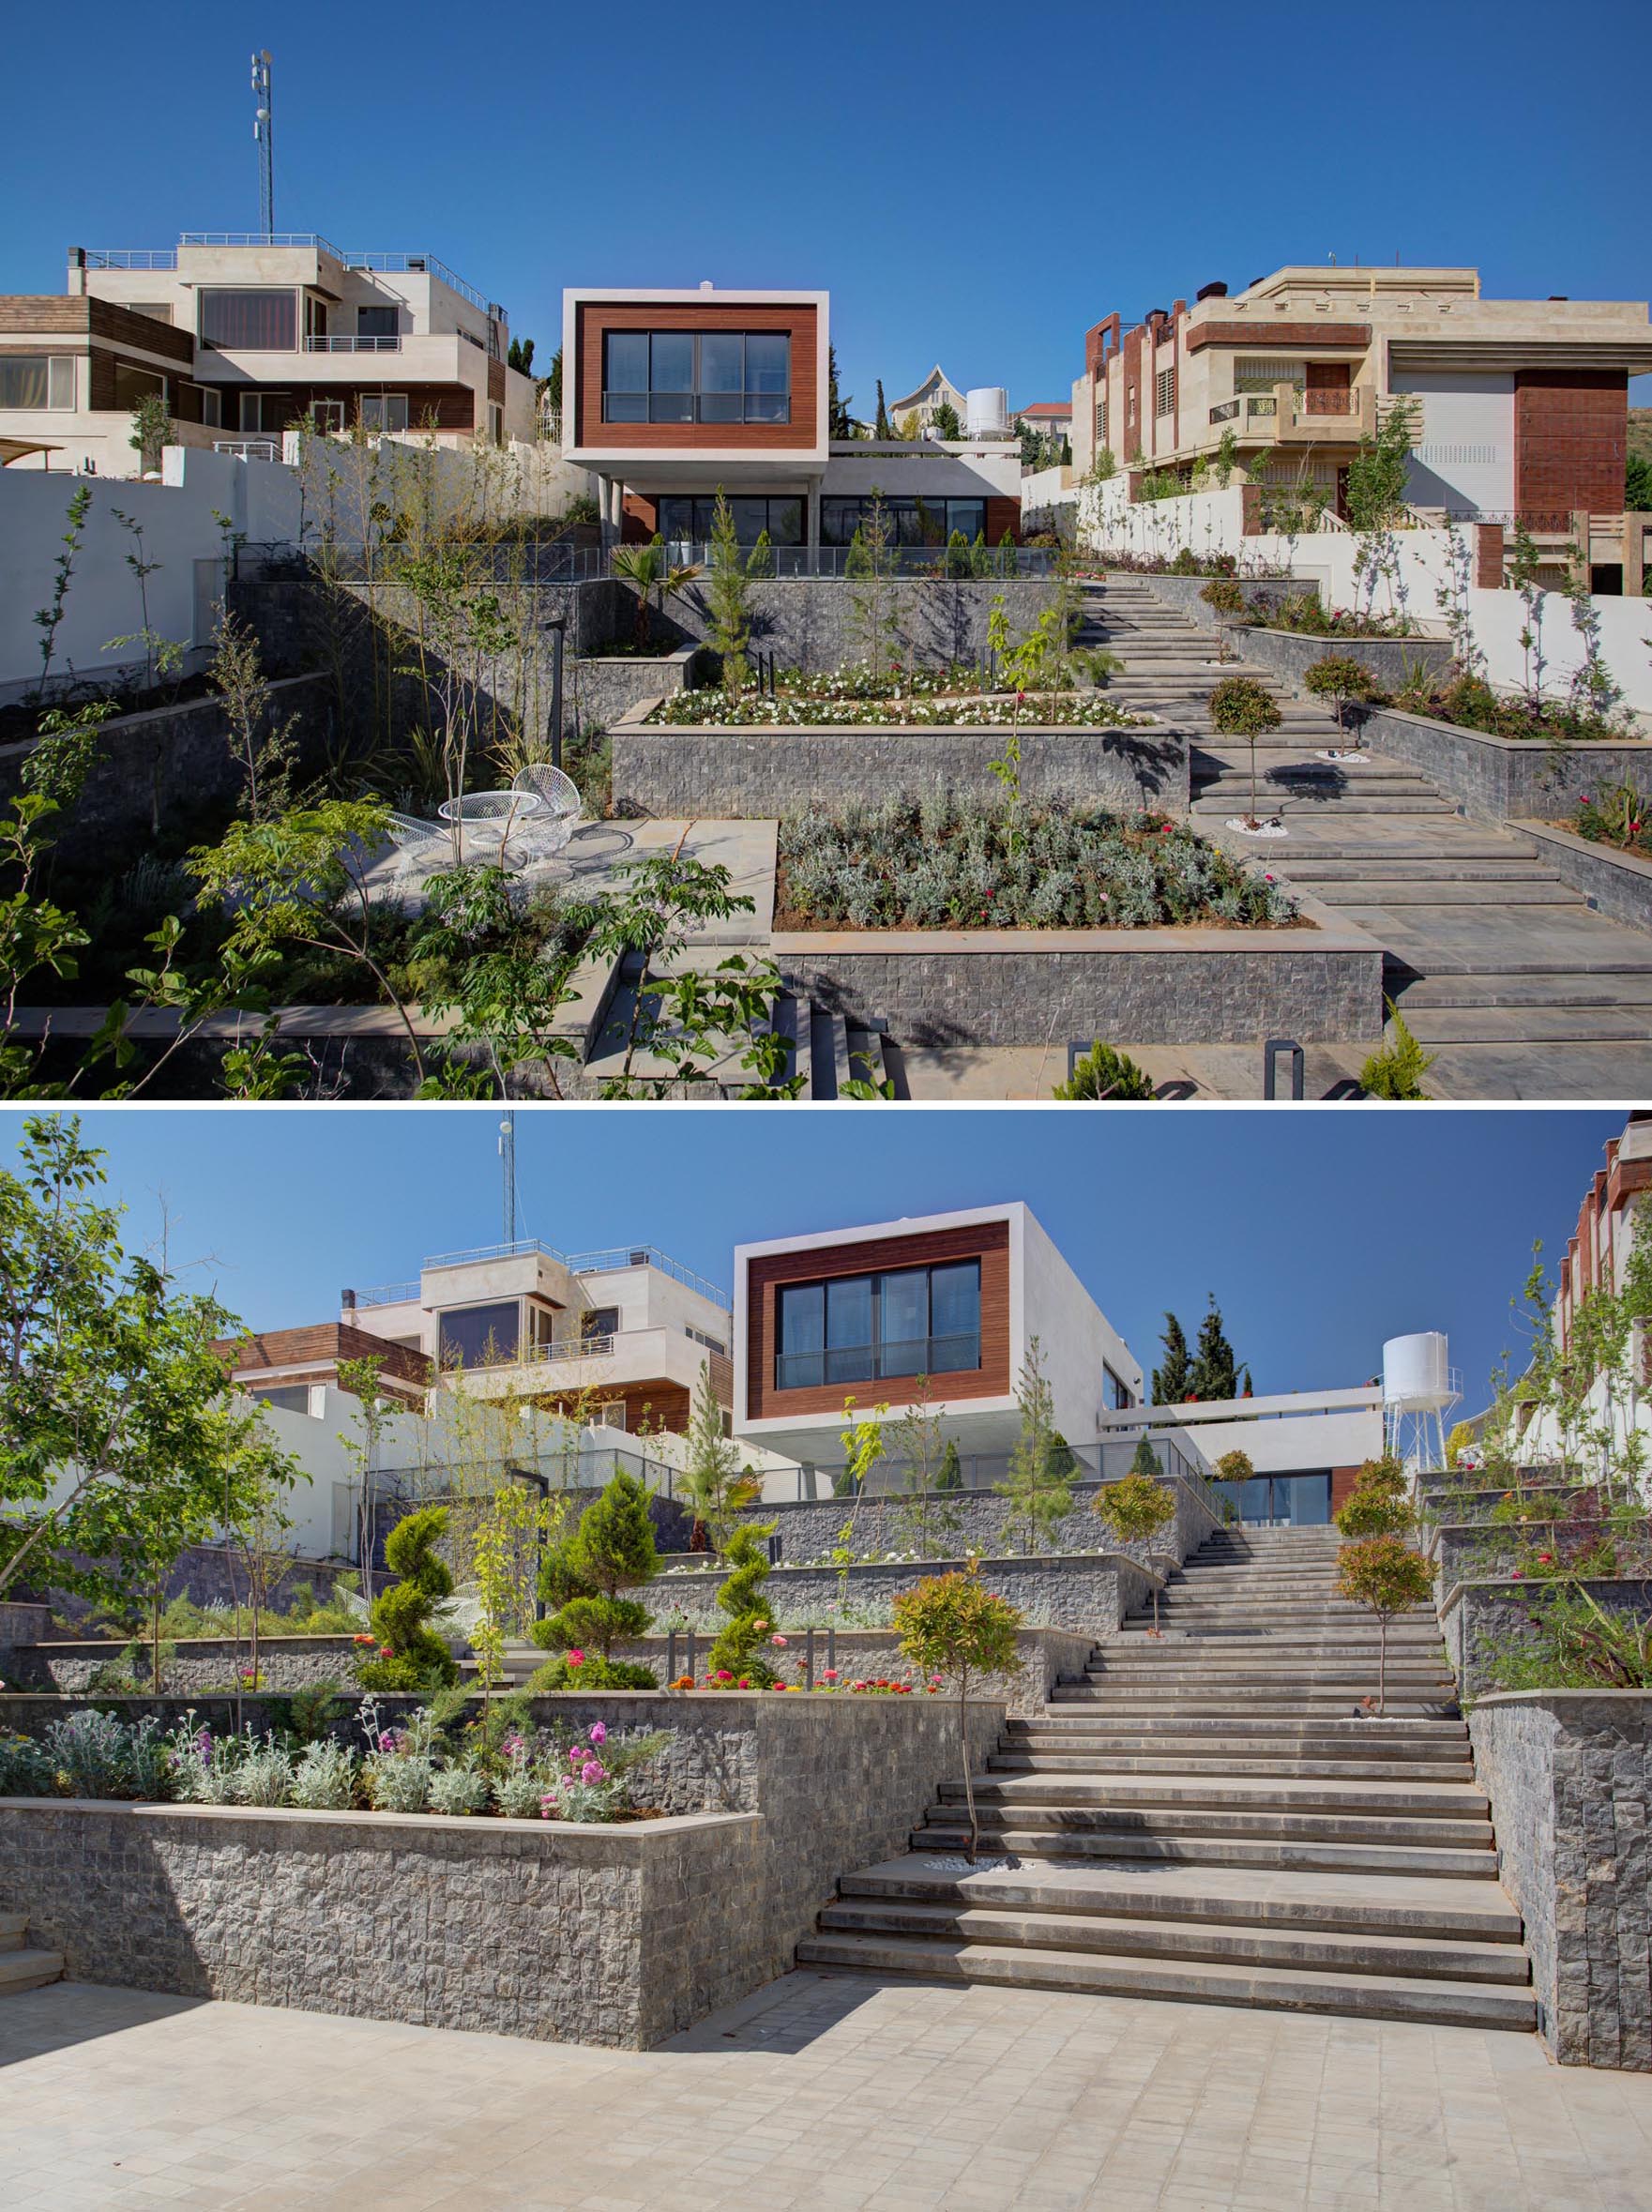 A terraced yard with wide stairs, small gardens, and places for relaxing.